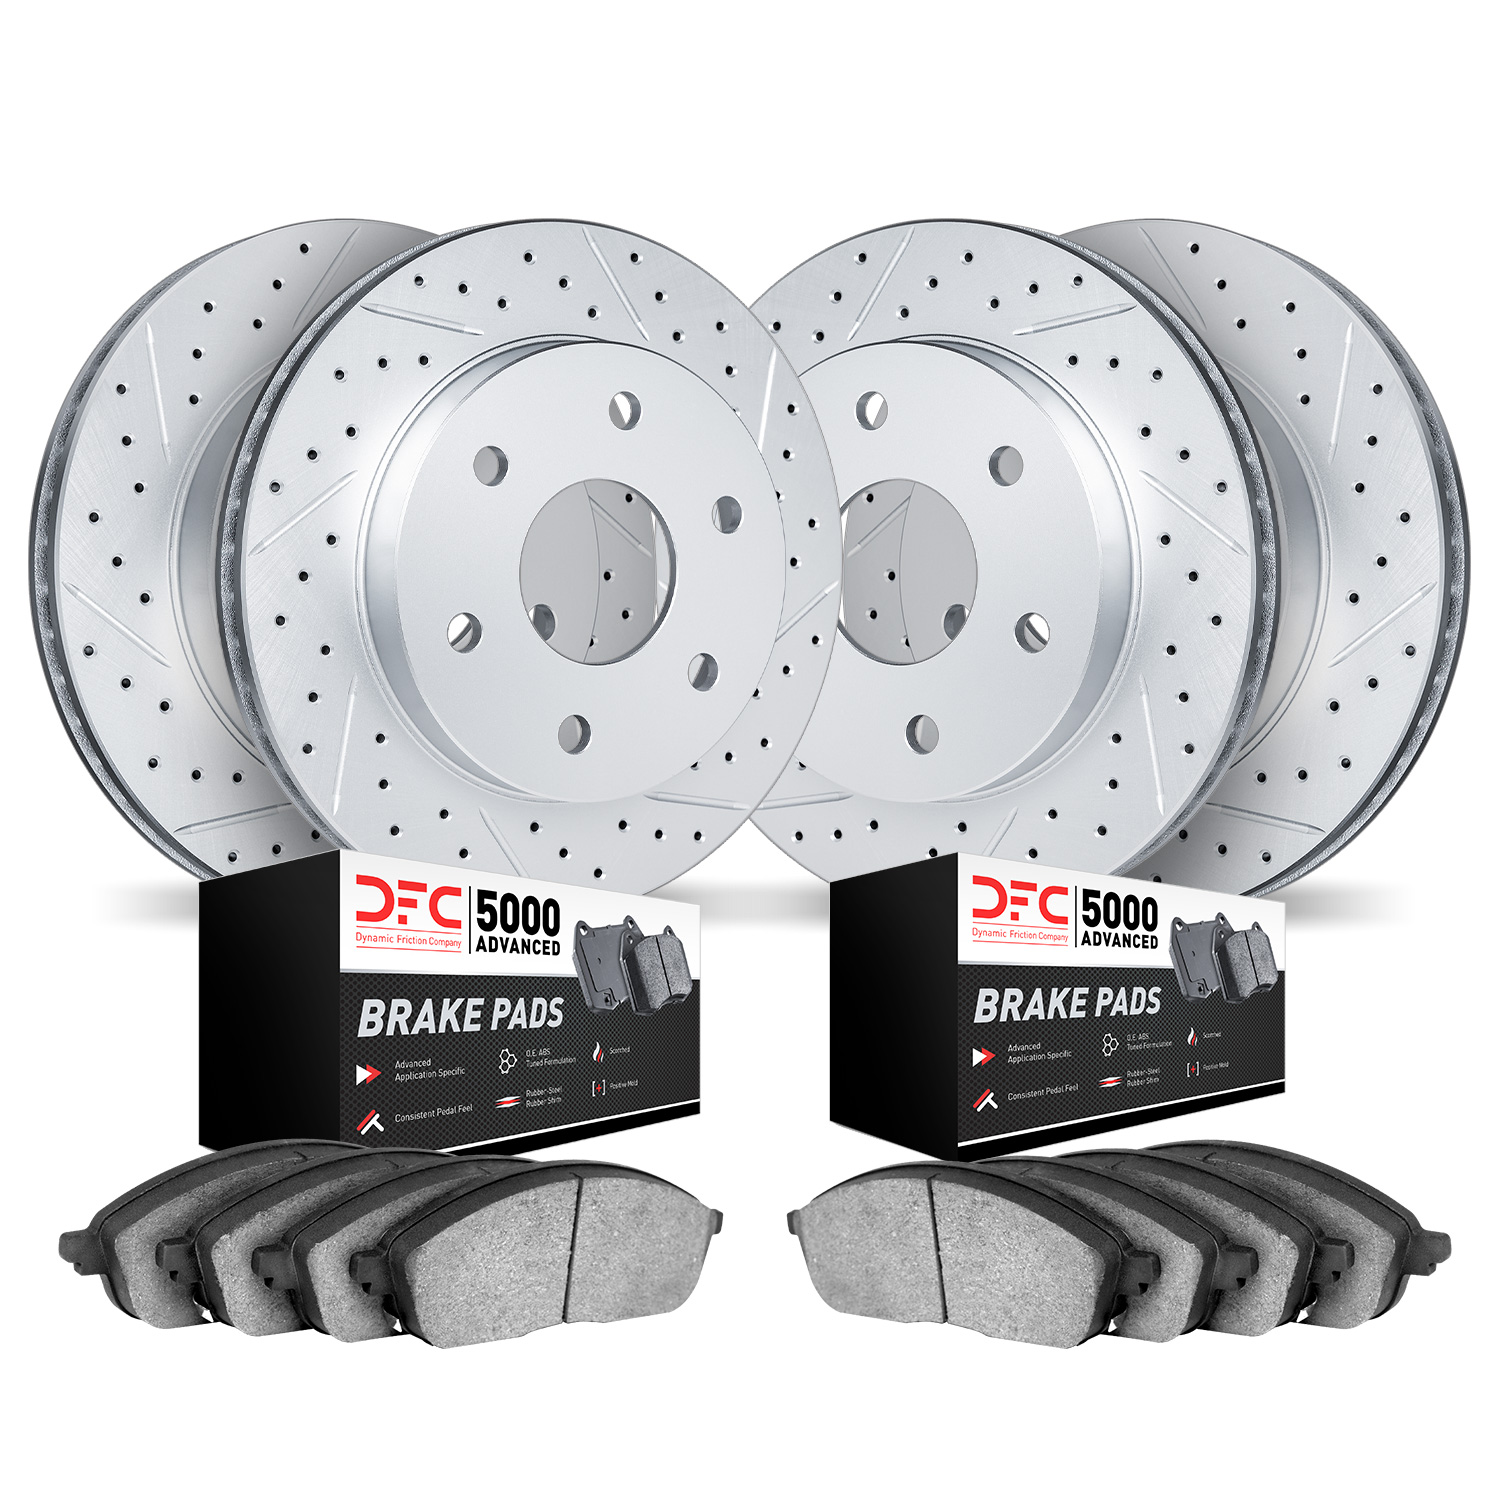 2504-40089 Geoperformance Drilled/Slotted Rotors w/5000 Advanced Brake Pads Kit, 2007-2018 Multiple Makes/Models, Position: Fron